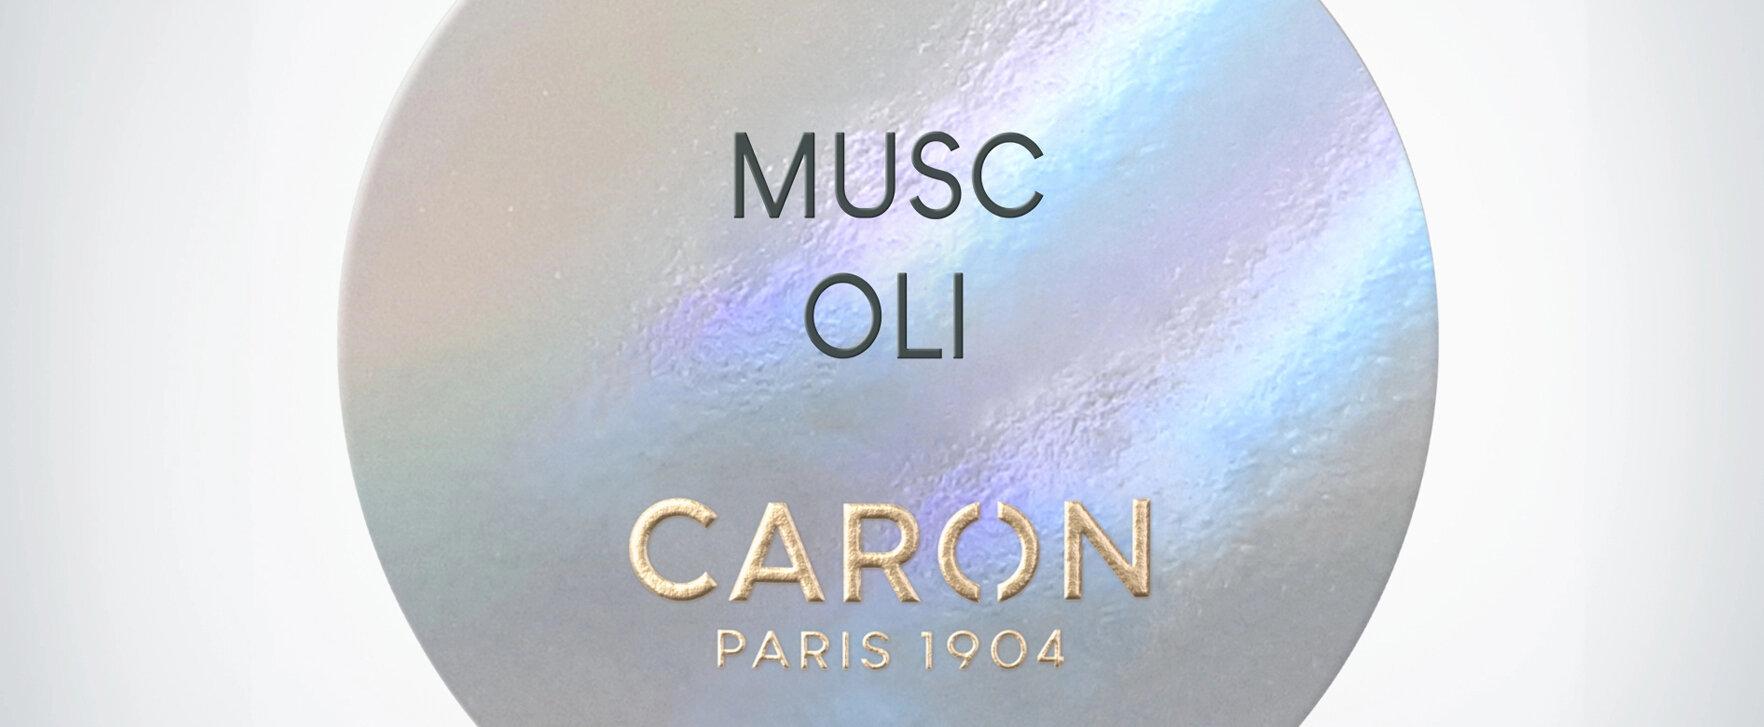 “Musc Oli” - New Perfume Release by Caron as a Collaboration Between Olivia de Rothschild and Jean Jacques